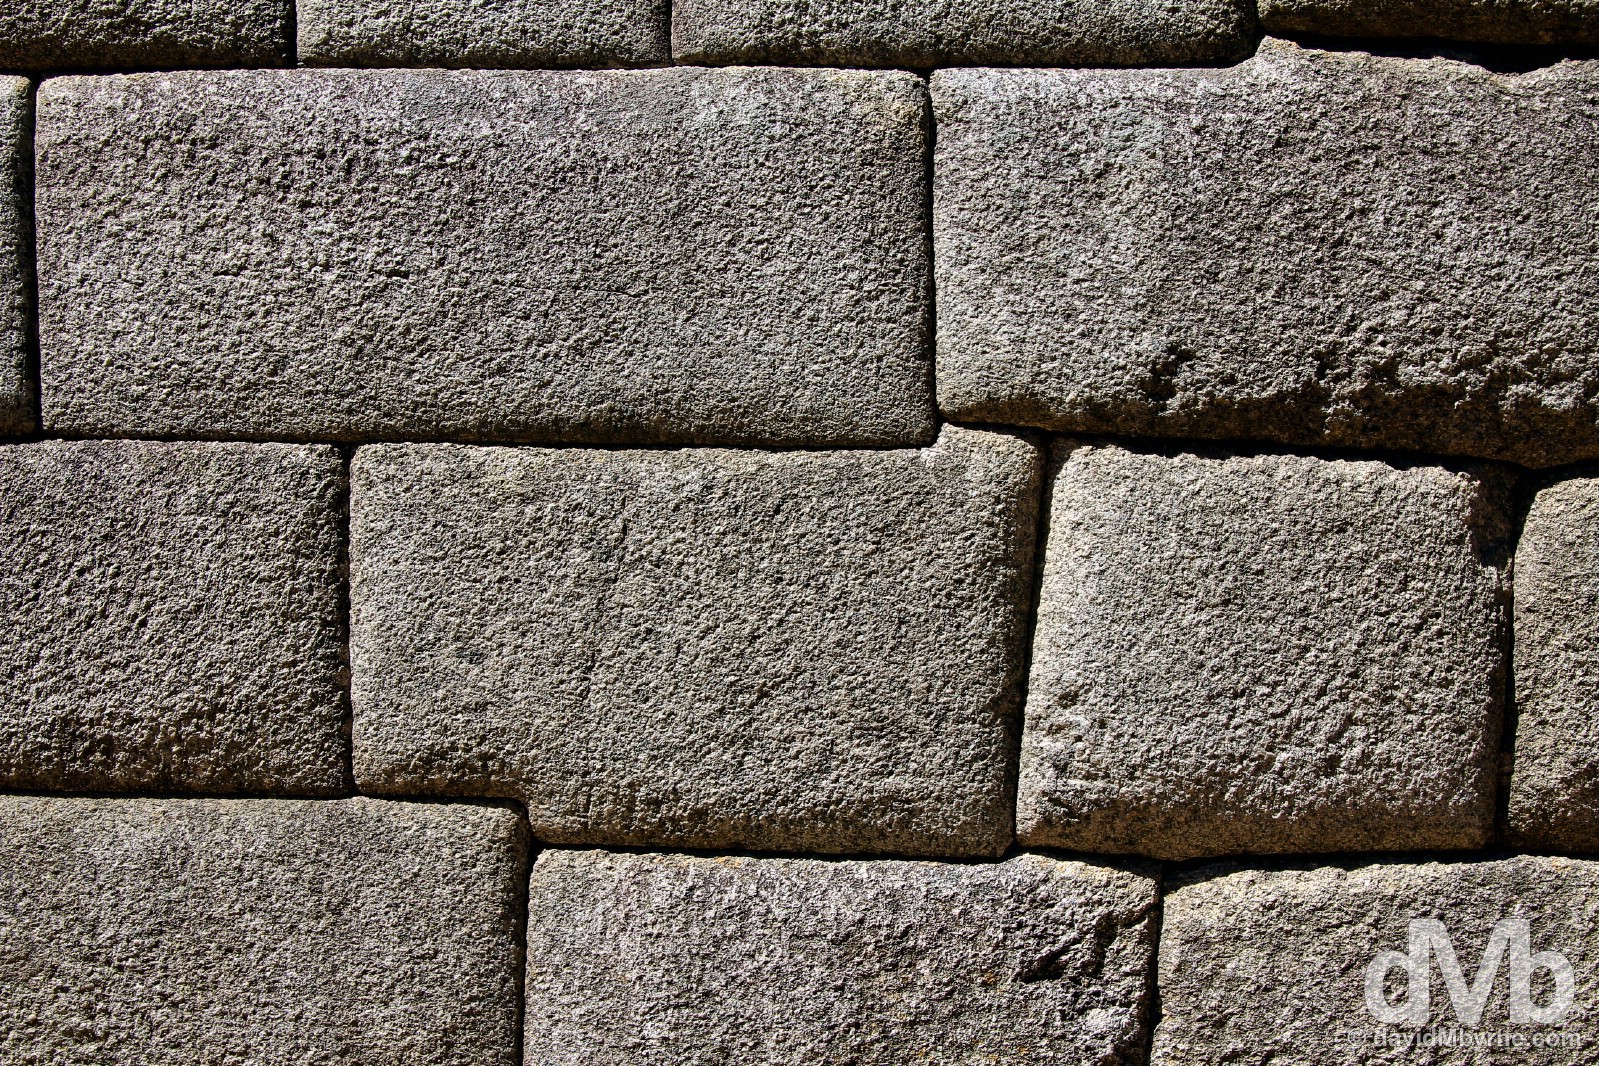 An example of rectangular convex Inca style brickwork of the site’s main temple, the Temple of the Sun, a semi-circular, stunted tower-like structure that displays some of Machu Picchu’s finest granite stonework. Machu Picchu, Peru. August 15, 2015. 